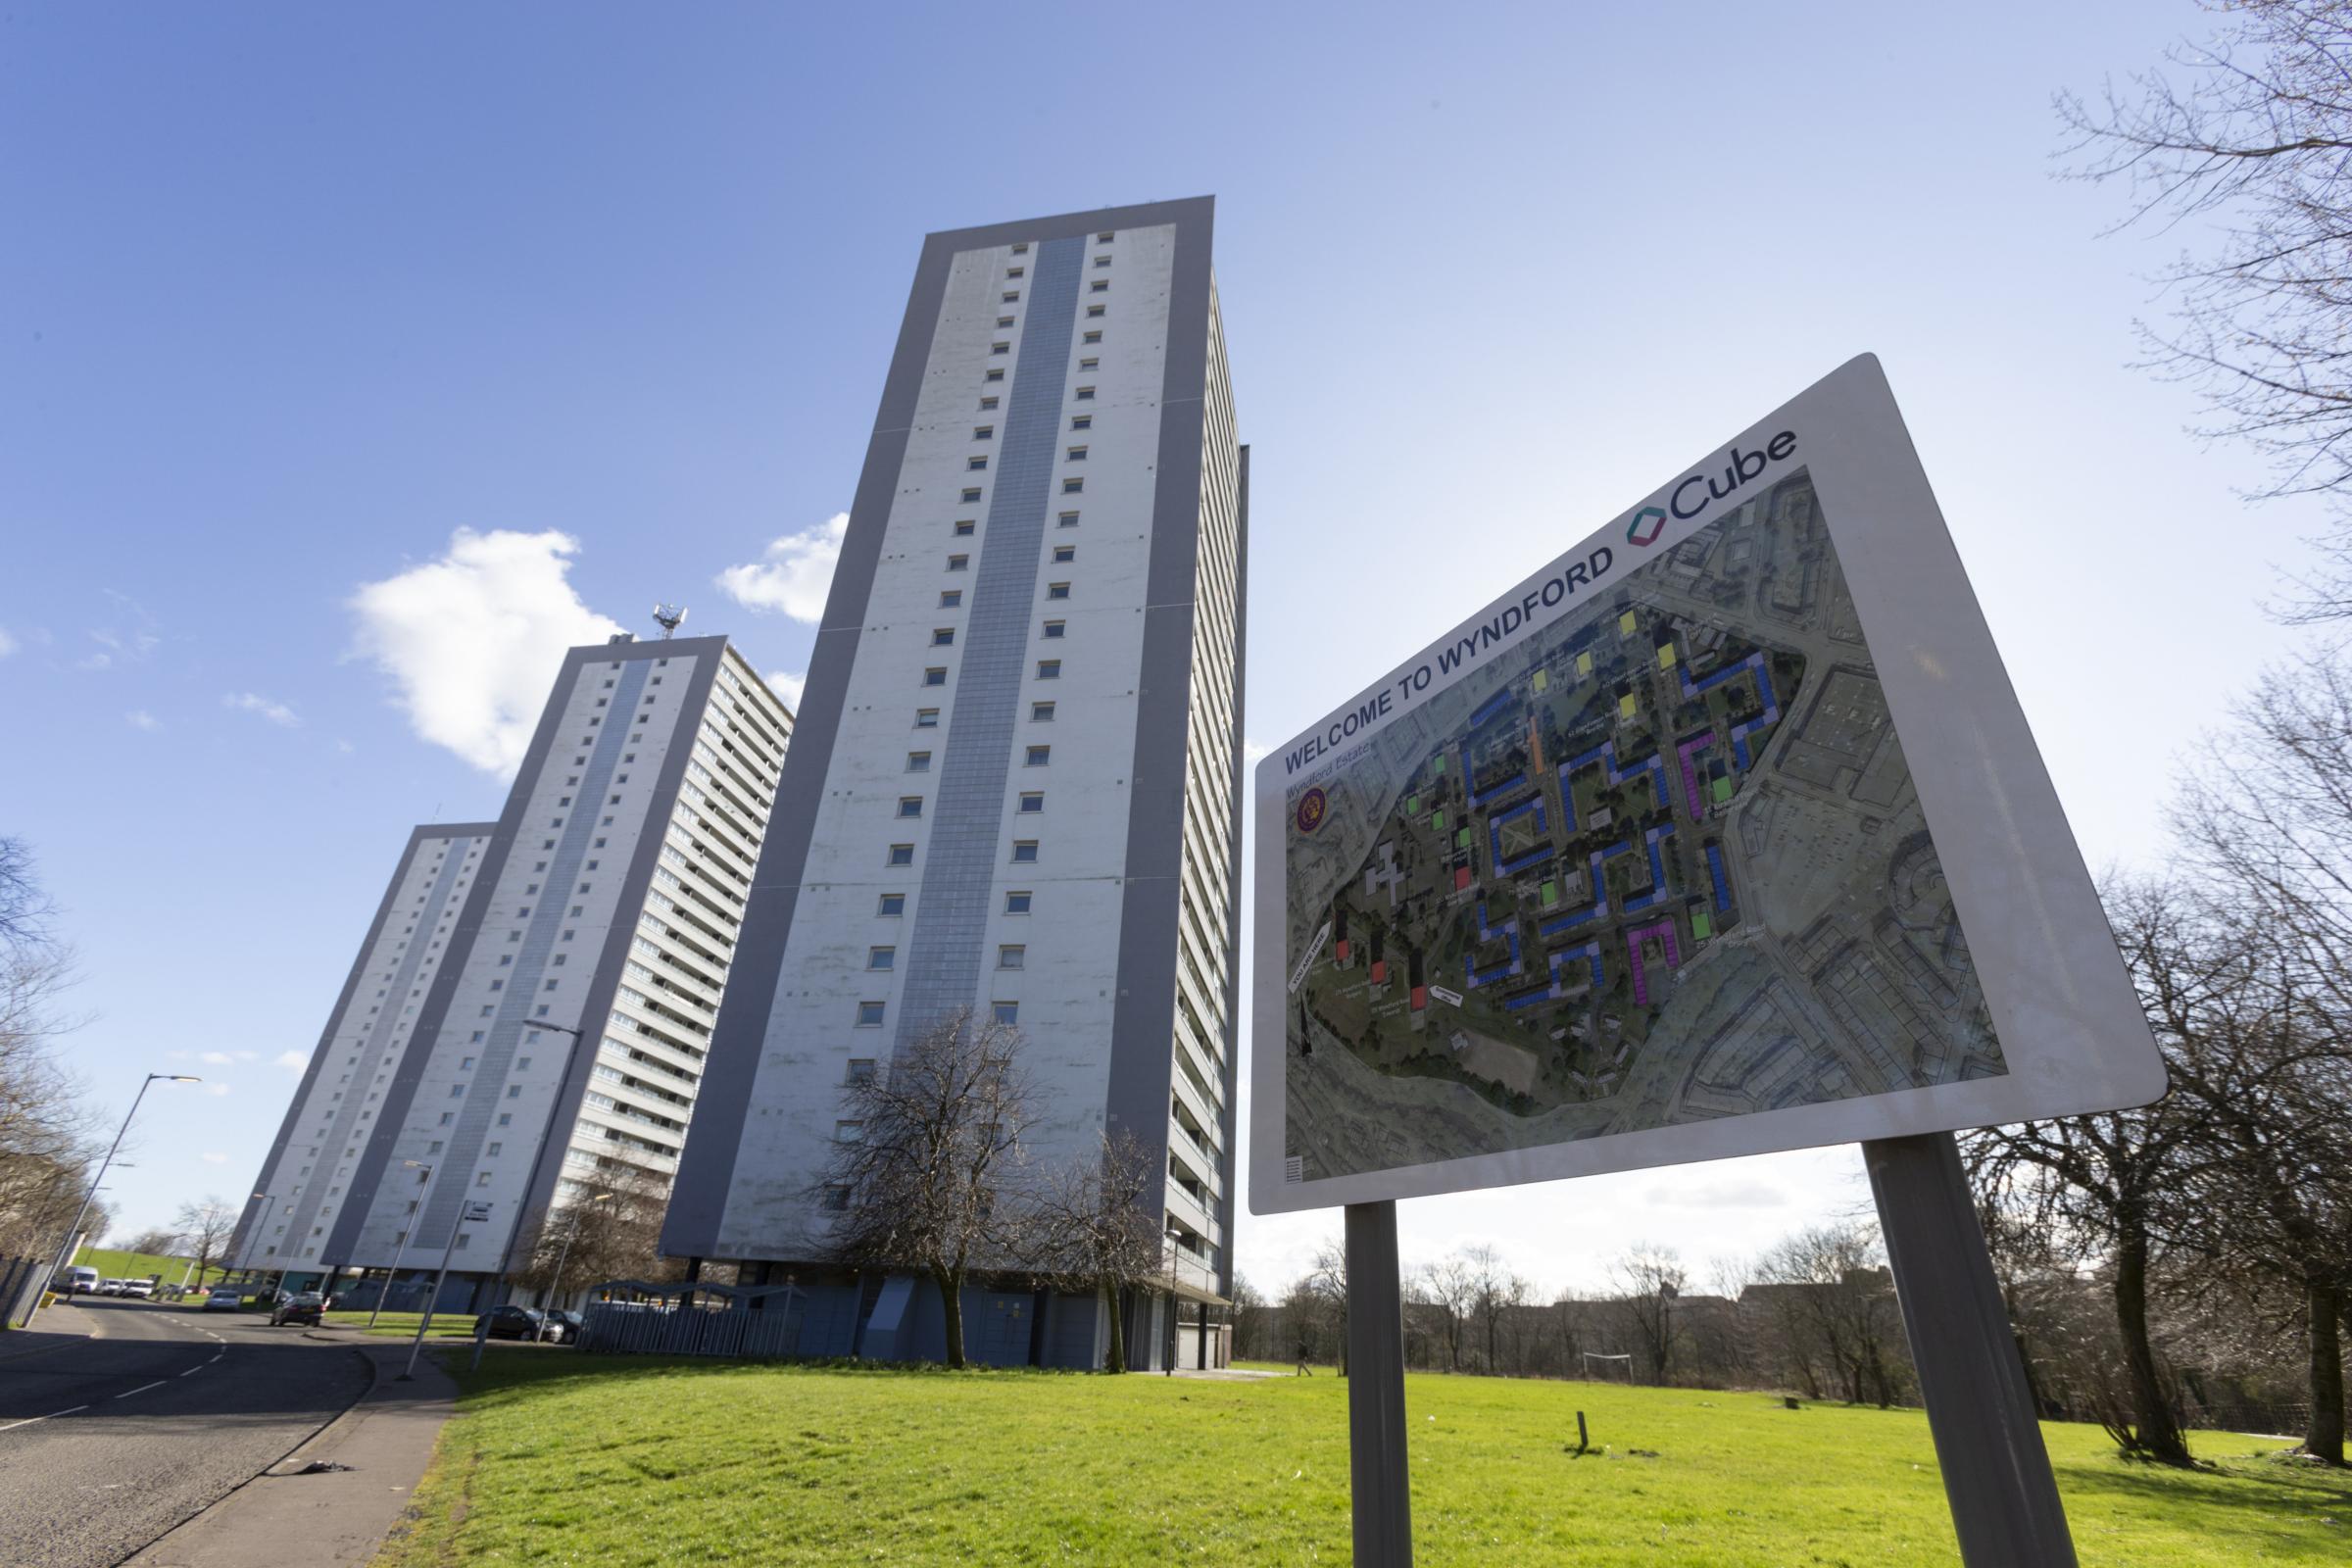 Tower blocks at Wyndford would be replaced by more energy efficient homes according to GHA. Photo: Colin Mearns.